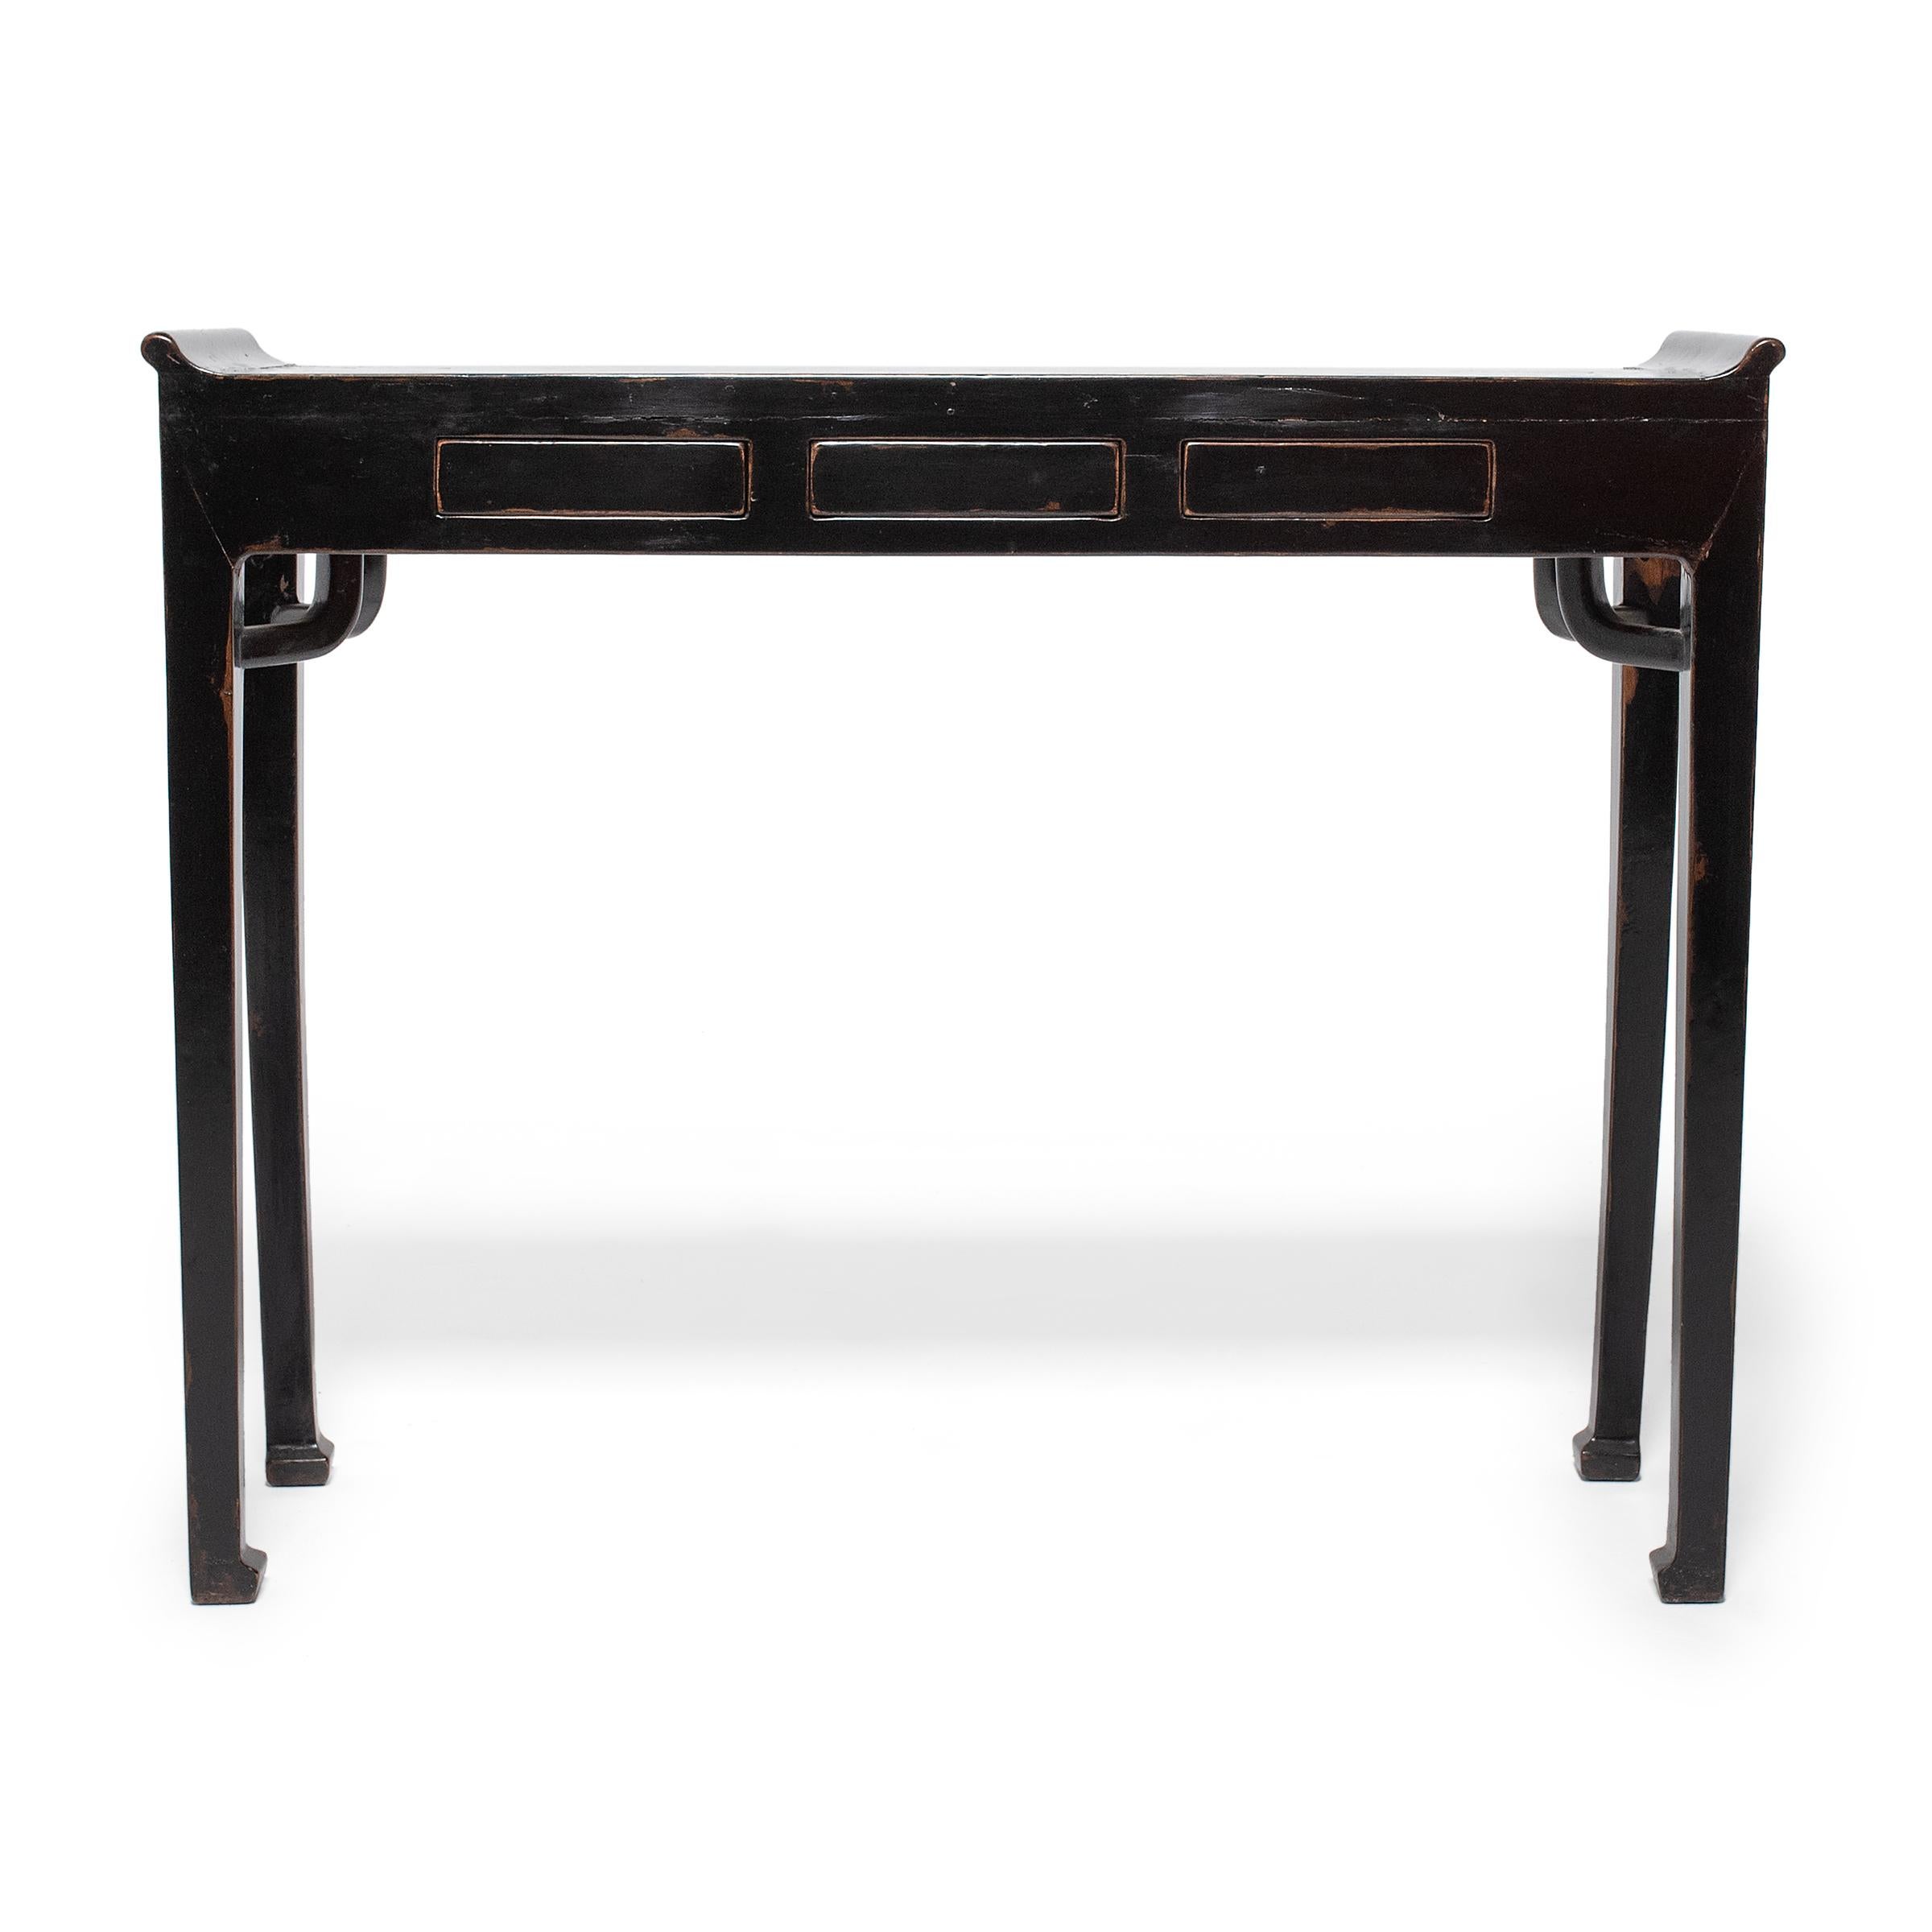 This black lacquer console table dates to the early 20th century and has the narrow form and everted flanges of a traditional altar table. The table has a flush-sided corner leg design with straight legs ending in hoof feet and topped by elegantly